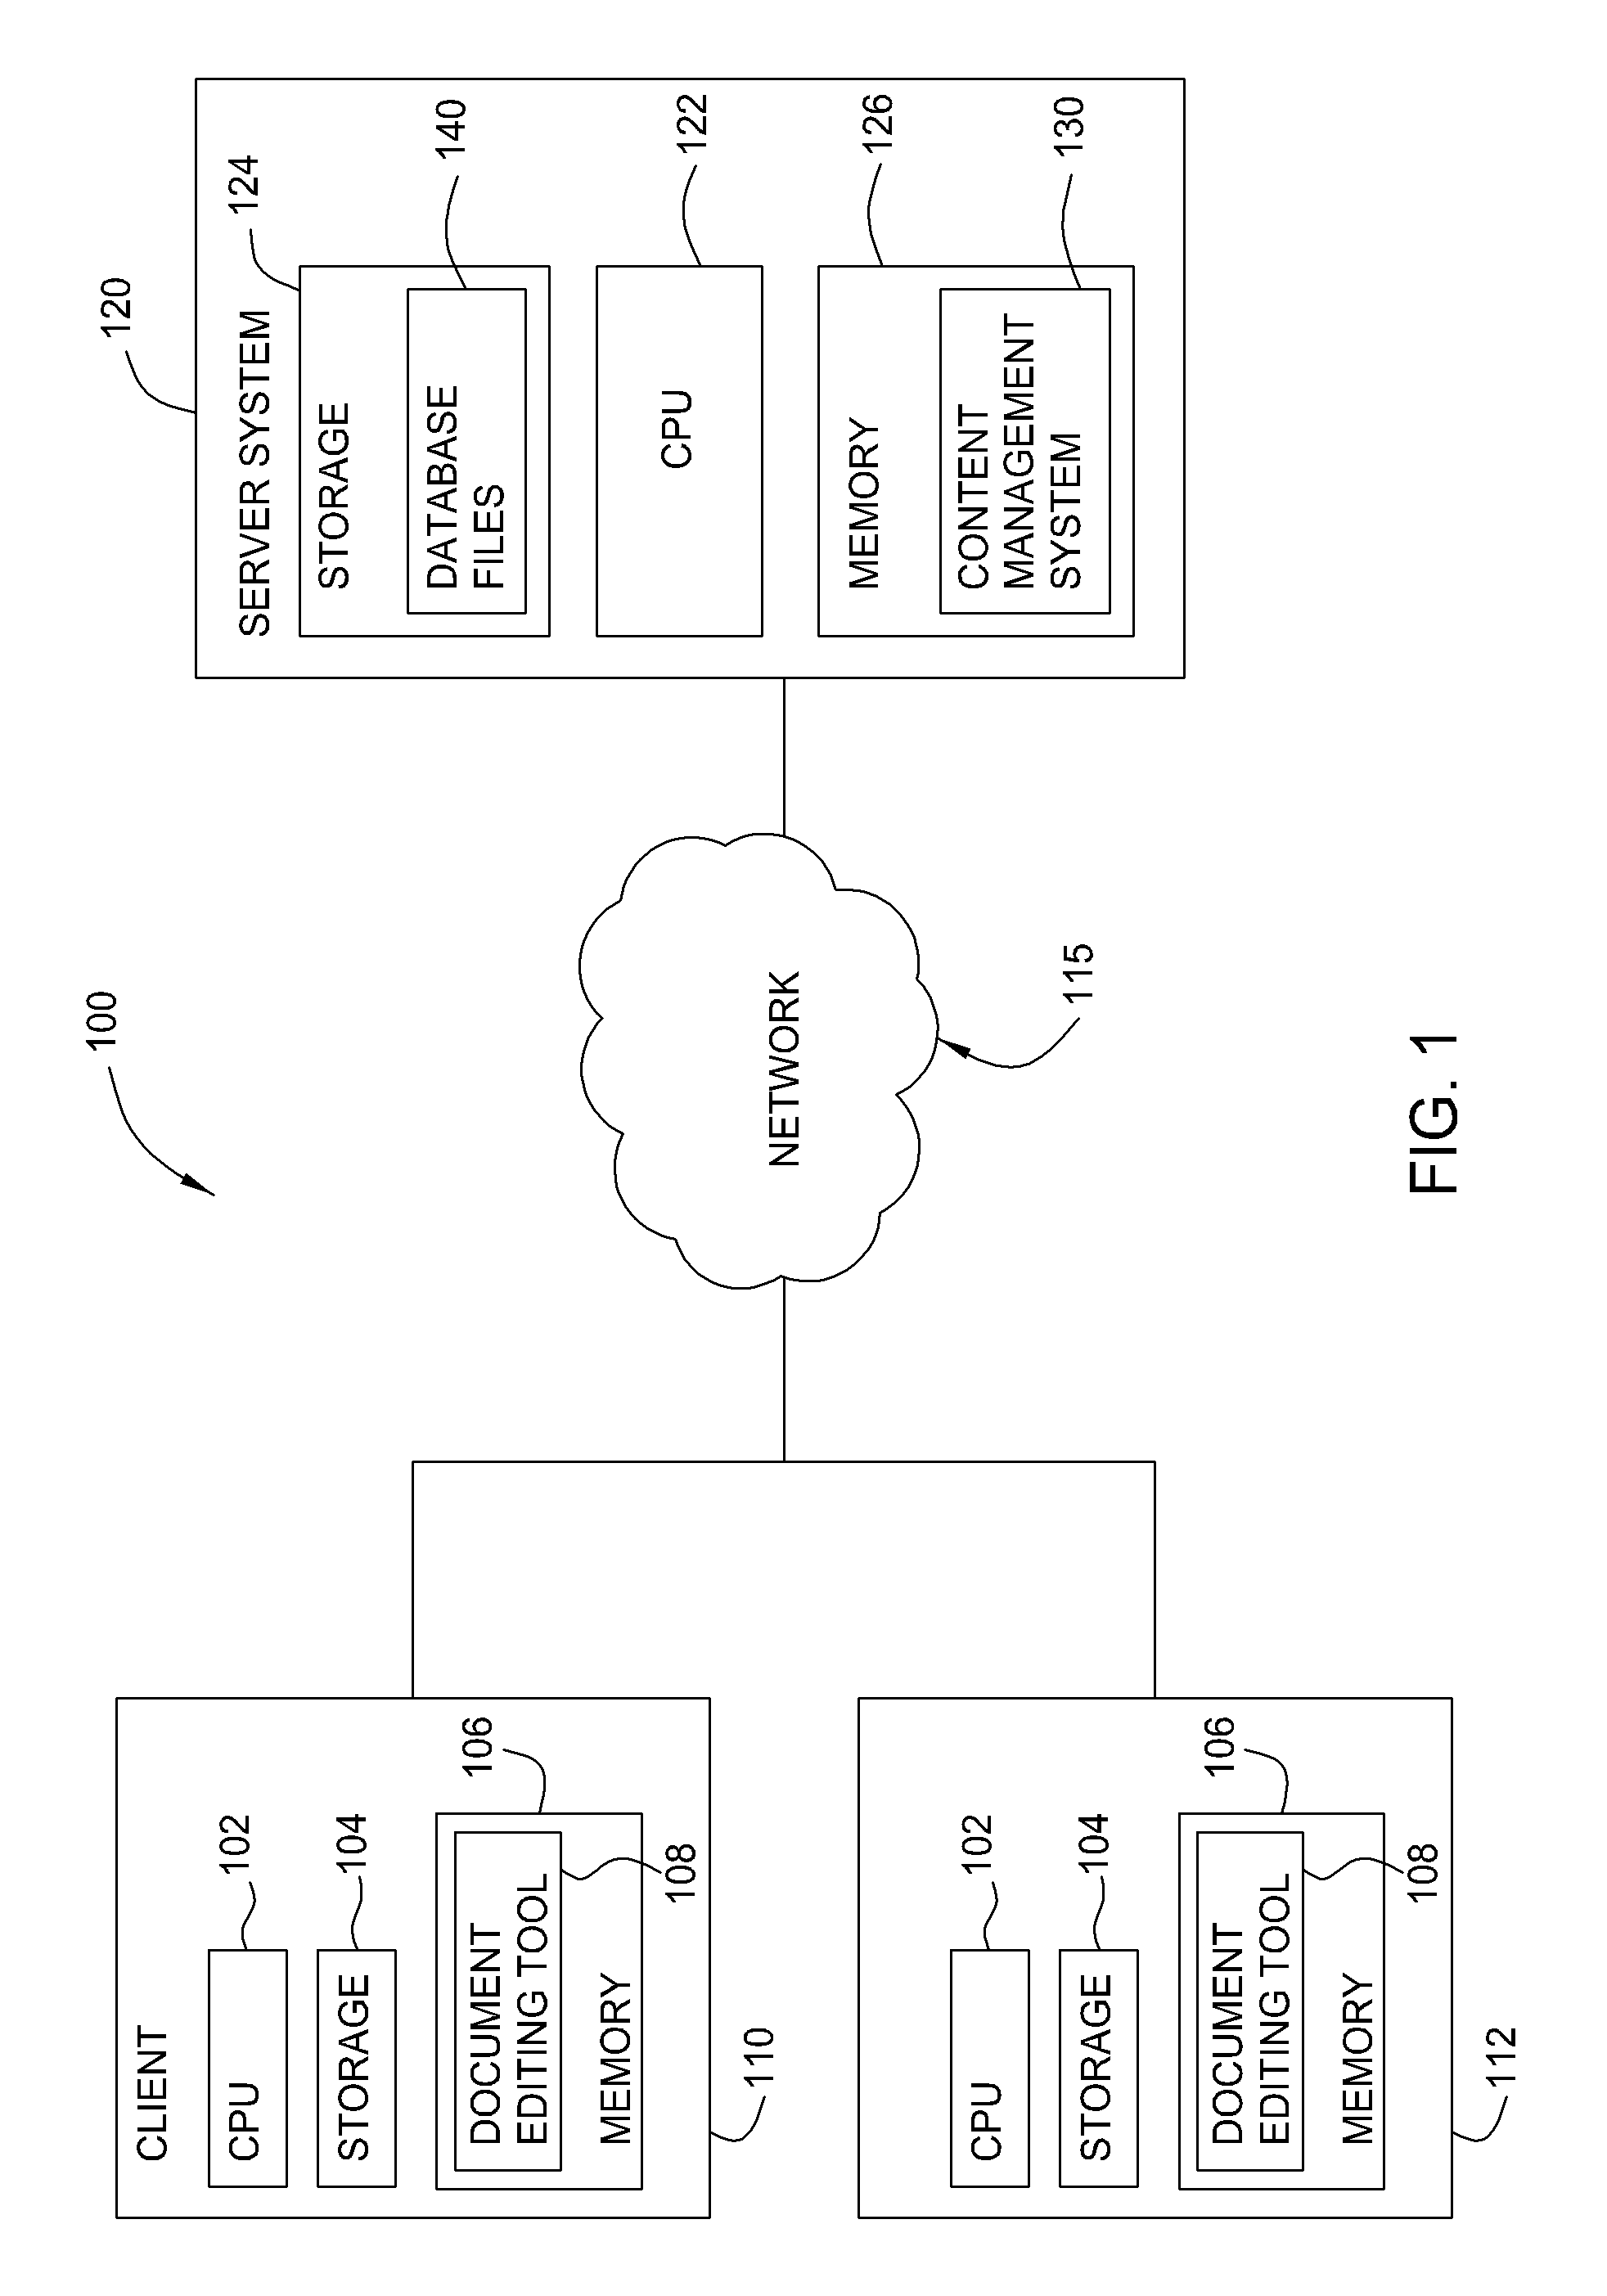 Method and system for compound document assembly with domain-specific rules processing and generic schema mapping